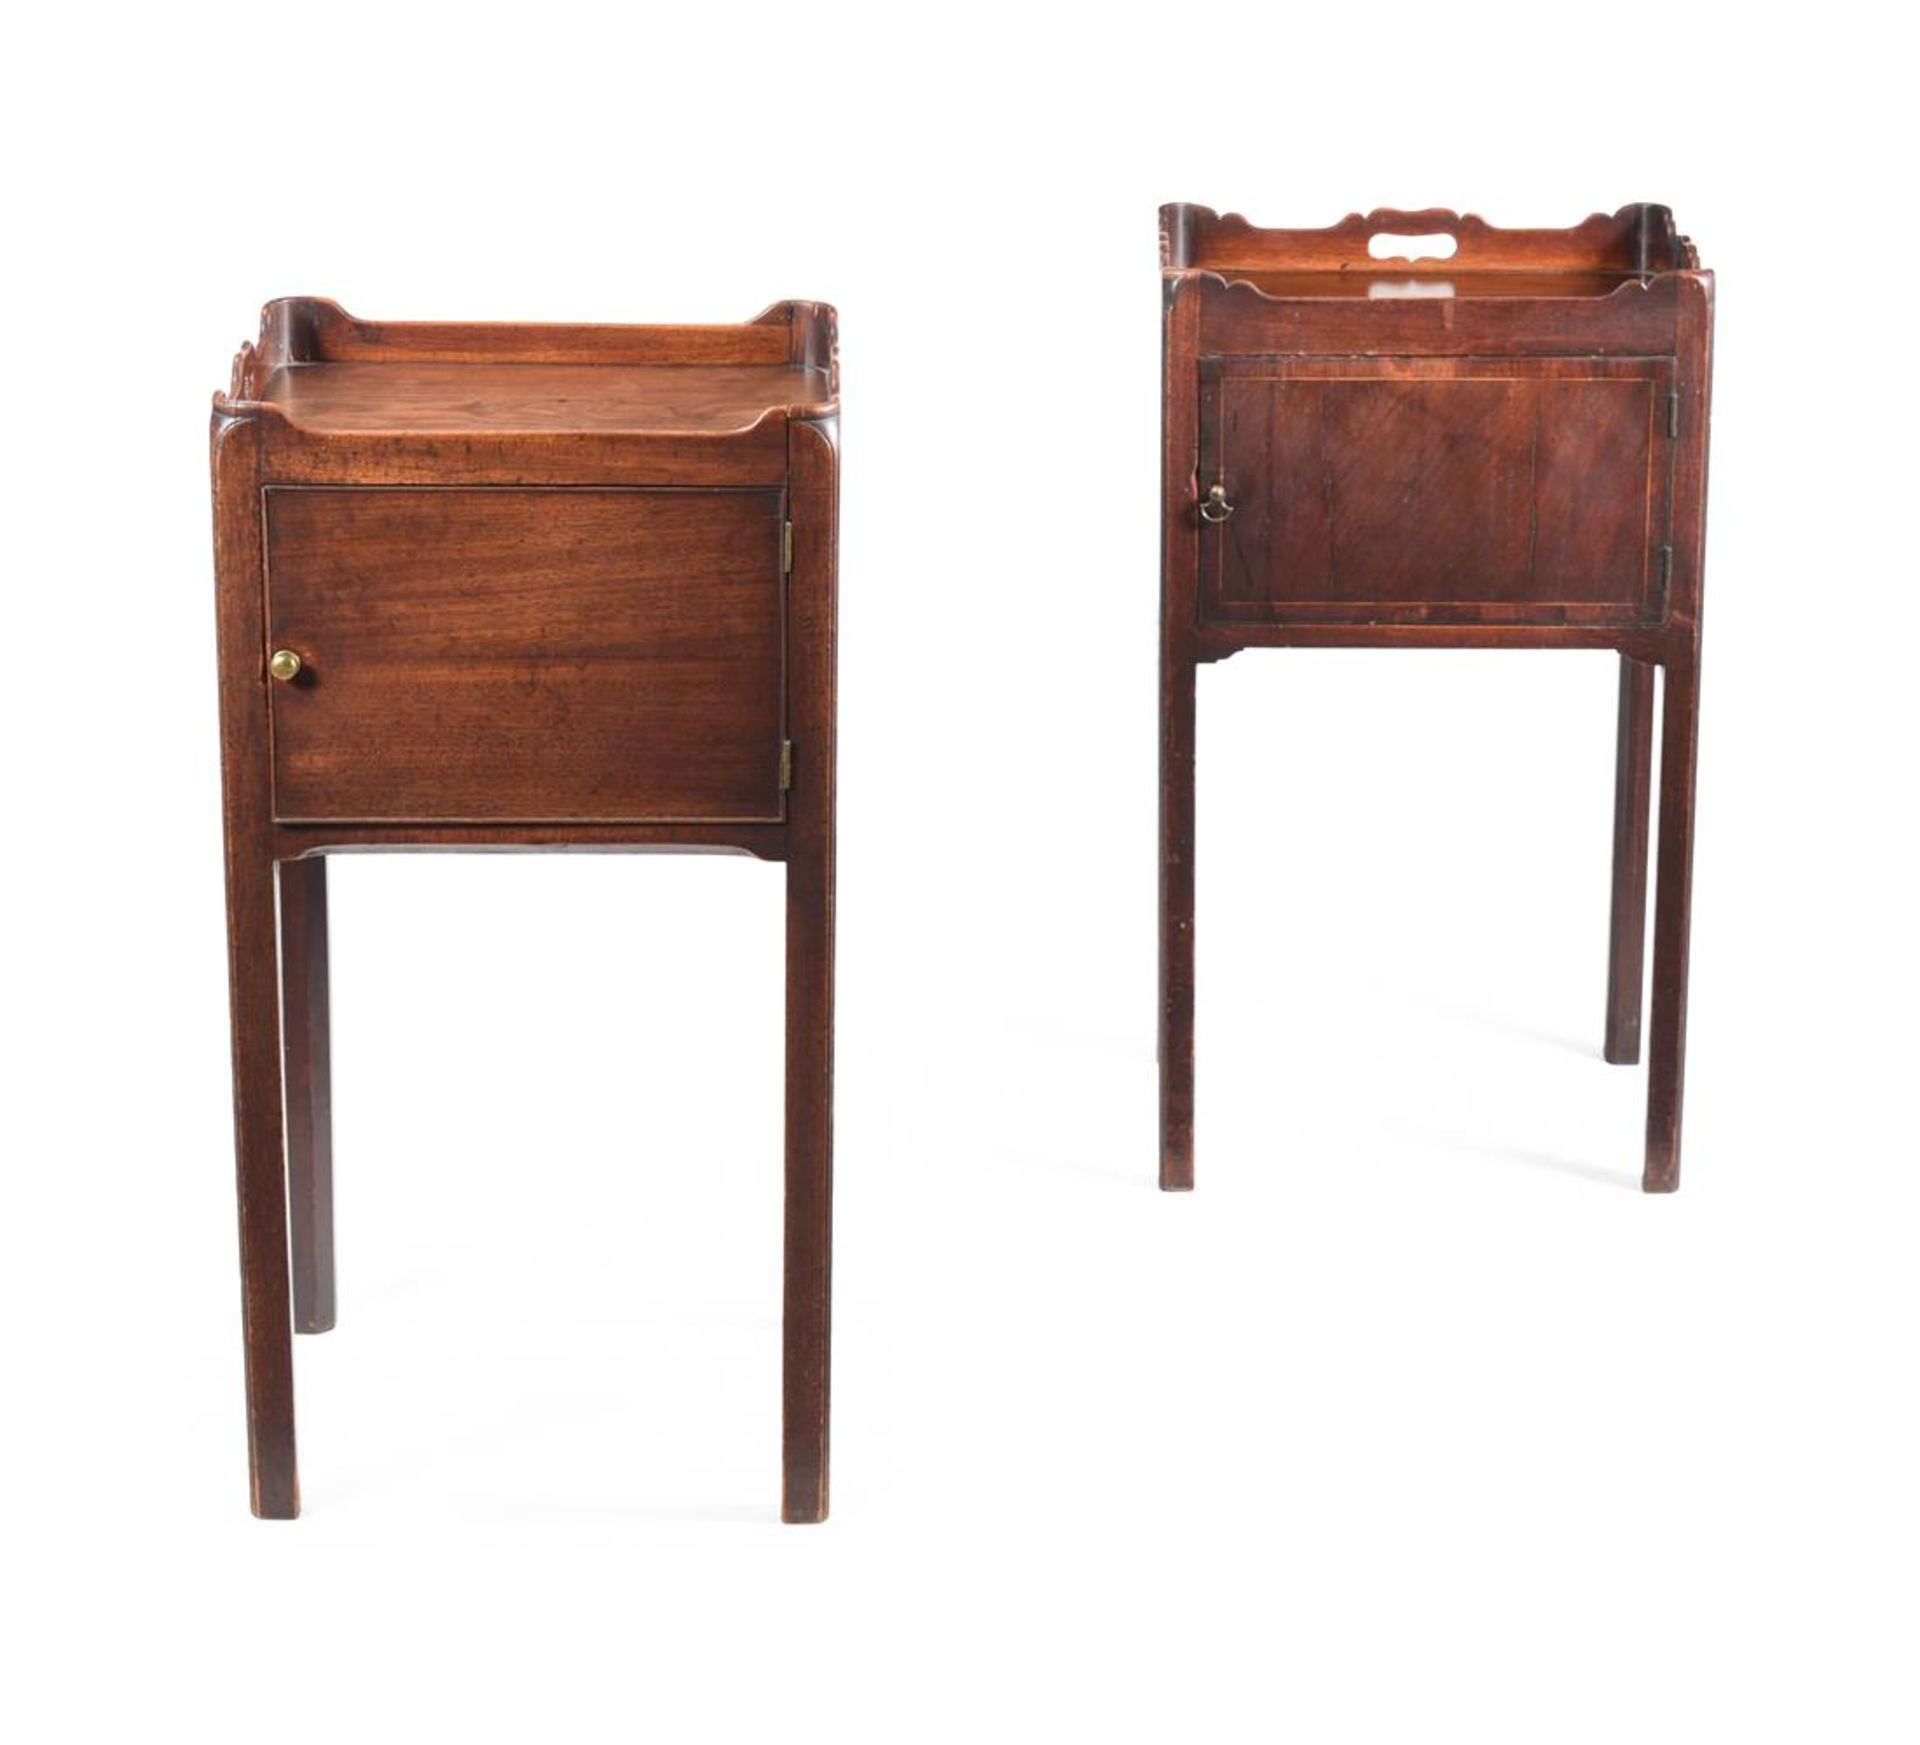 TWO GEORGE III SIMILAR MAHOGANY BEDSIDE CUPBOARDS, LATE 18TH OR EARLY 19TH CENTURY